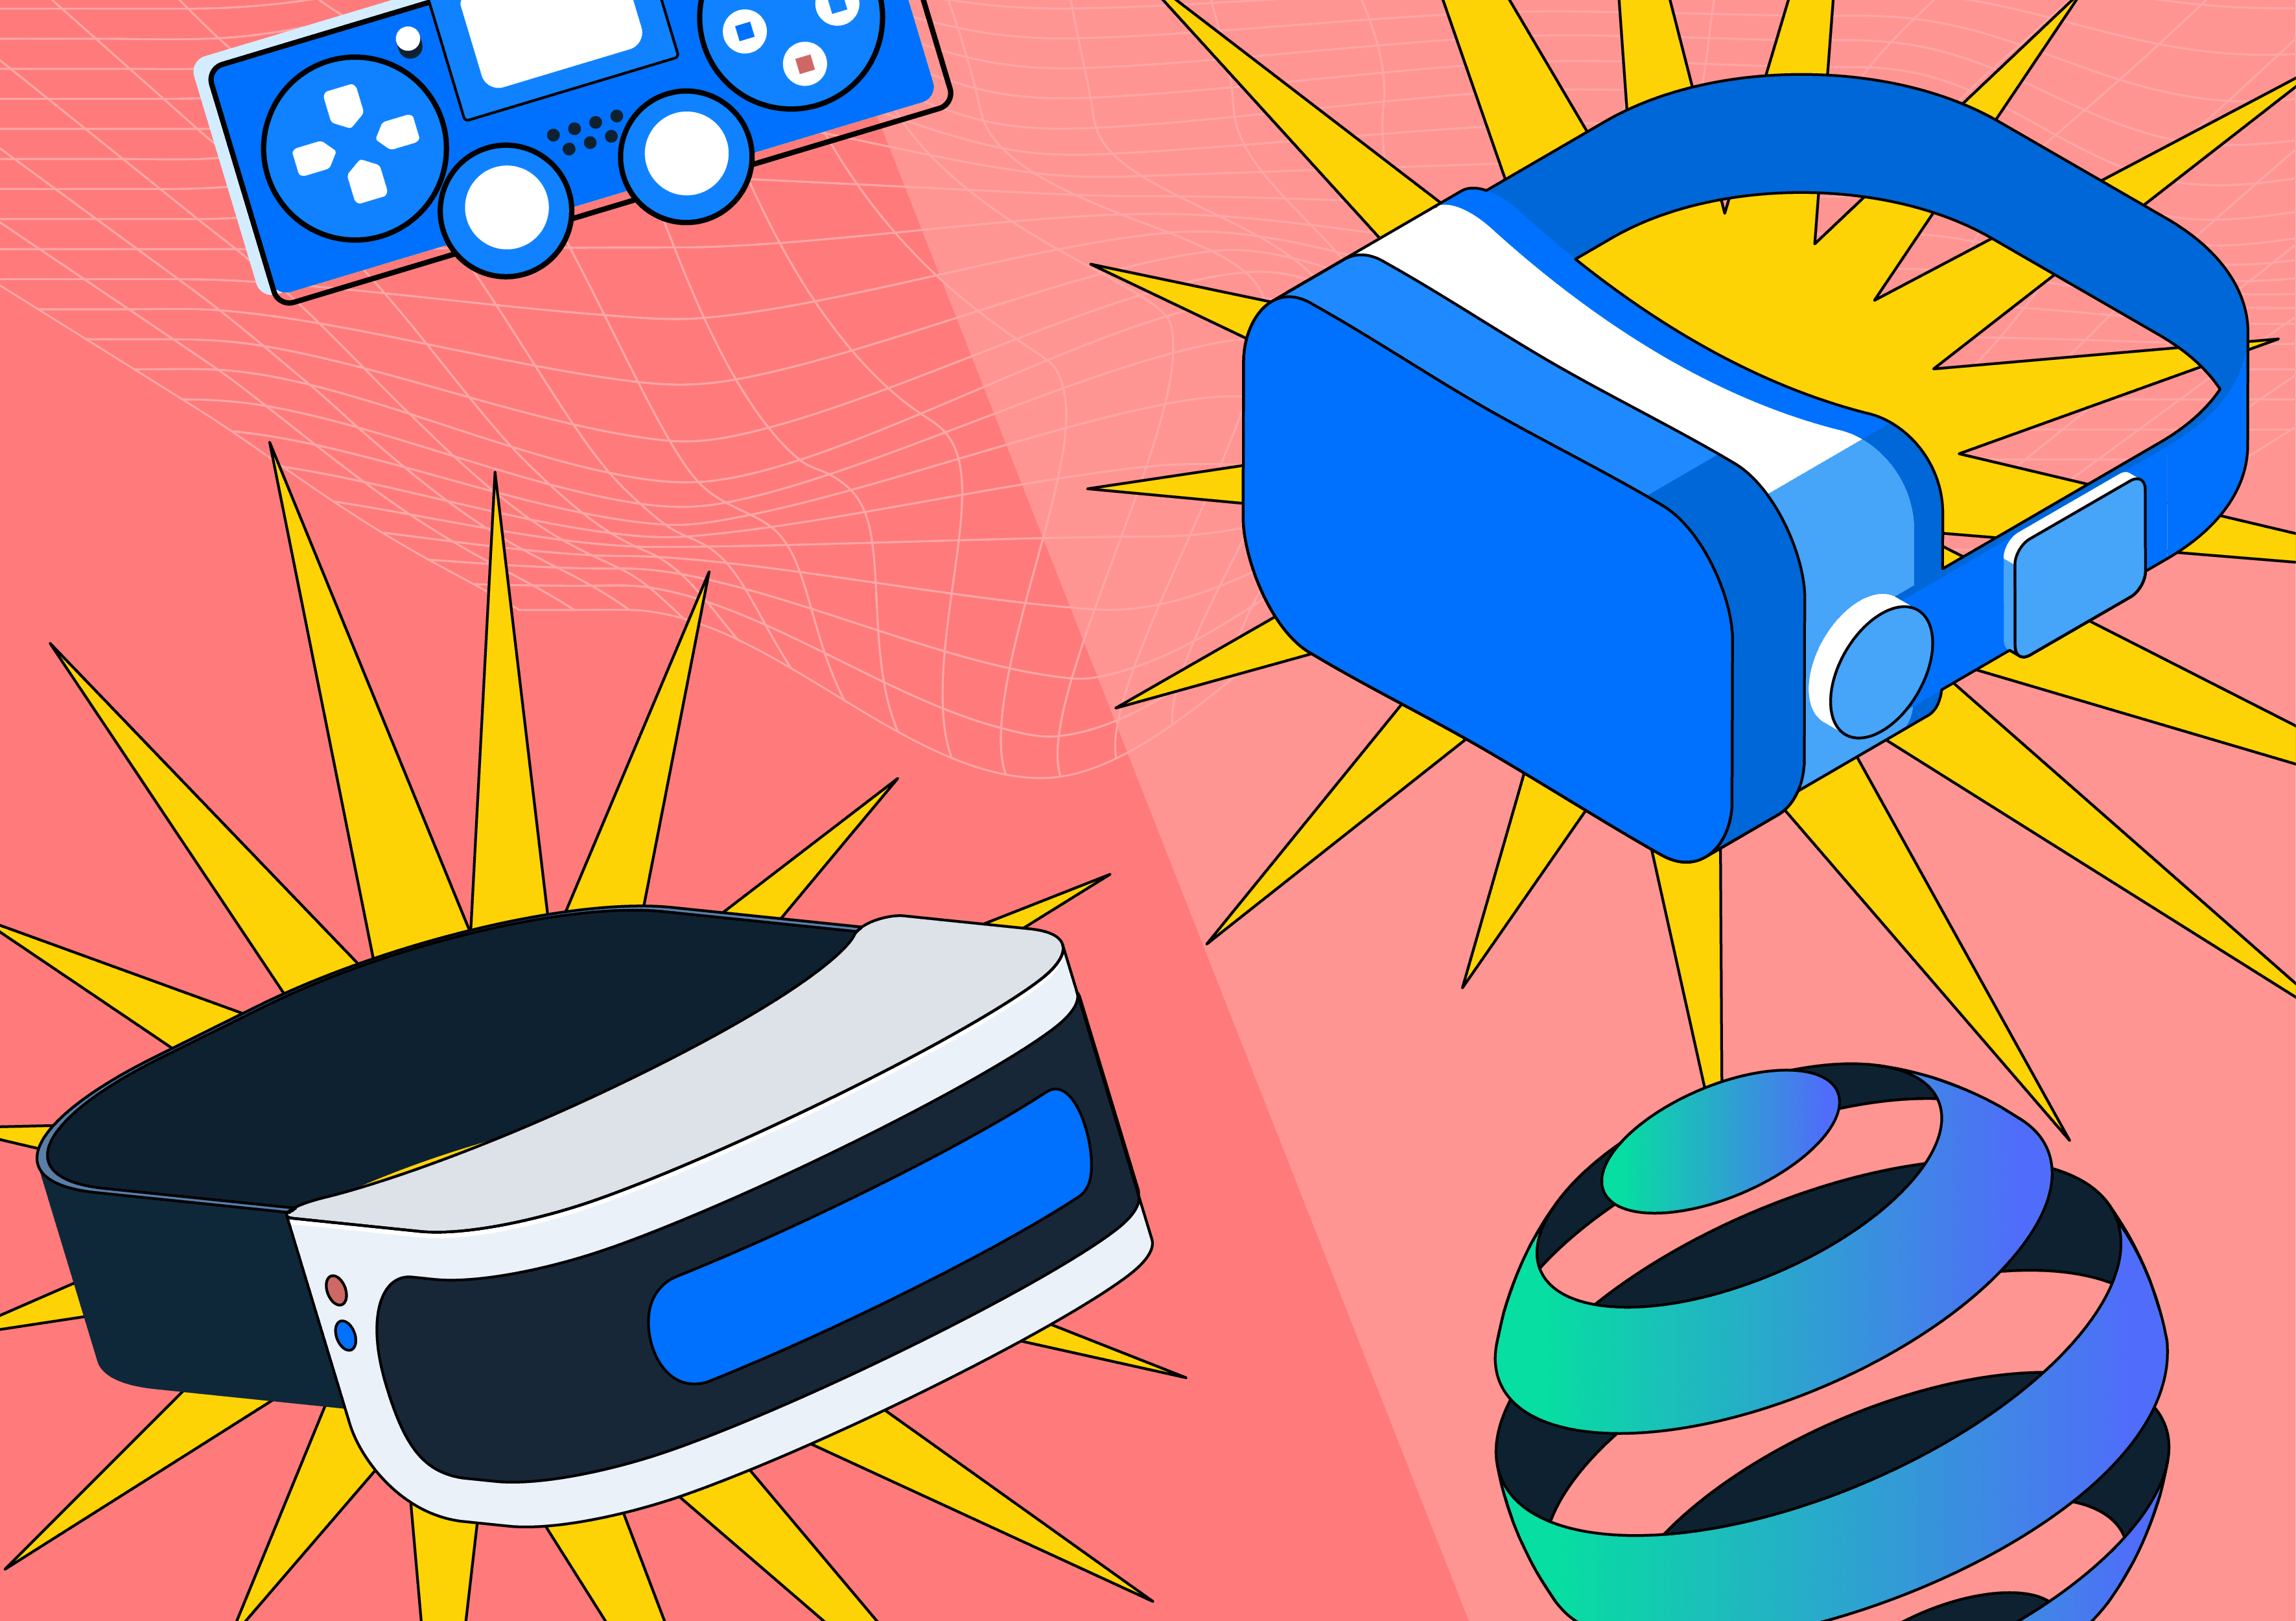 10 Tips for Maximizing Your PlayStation VR 2 Gaming Sessions